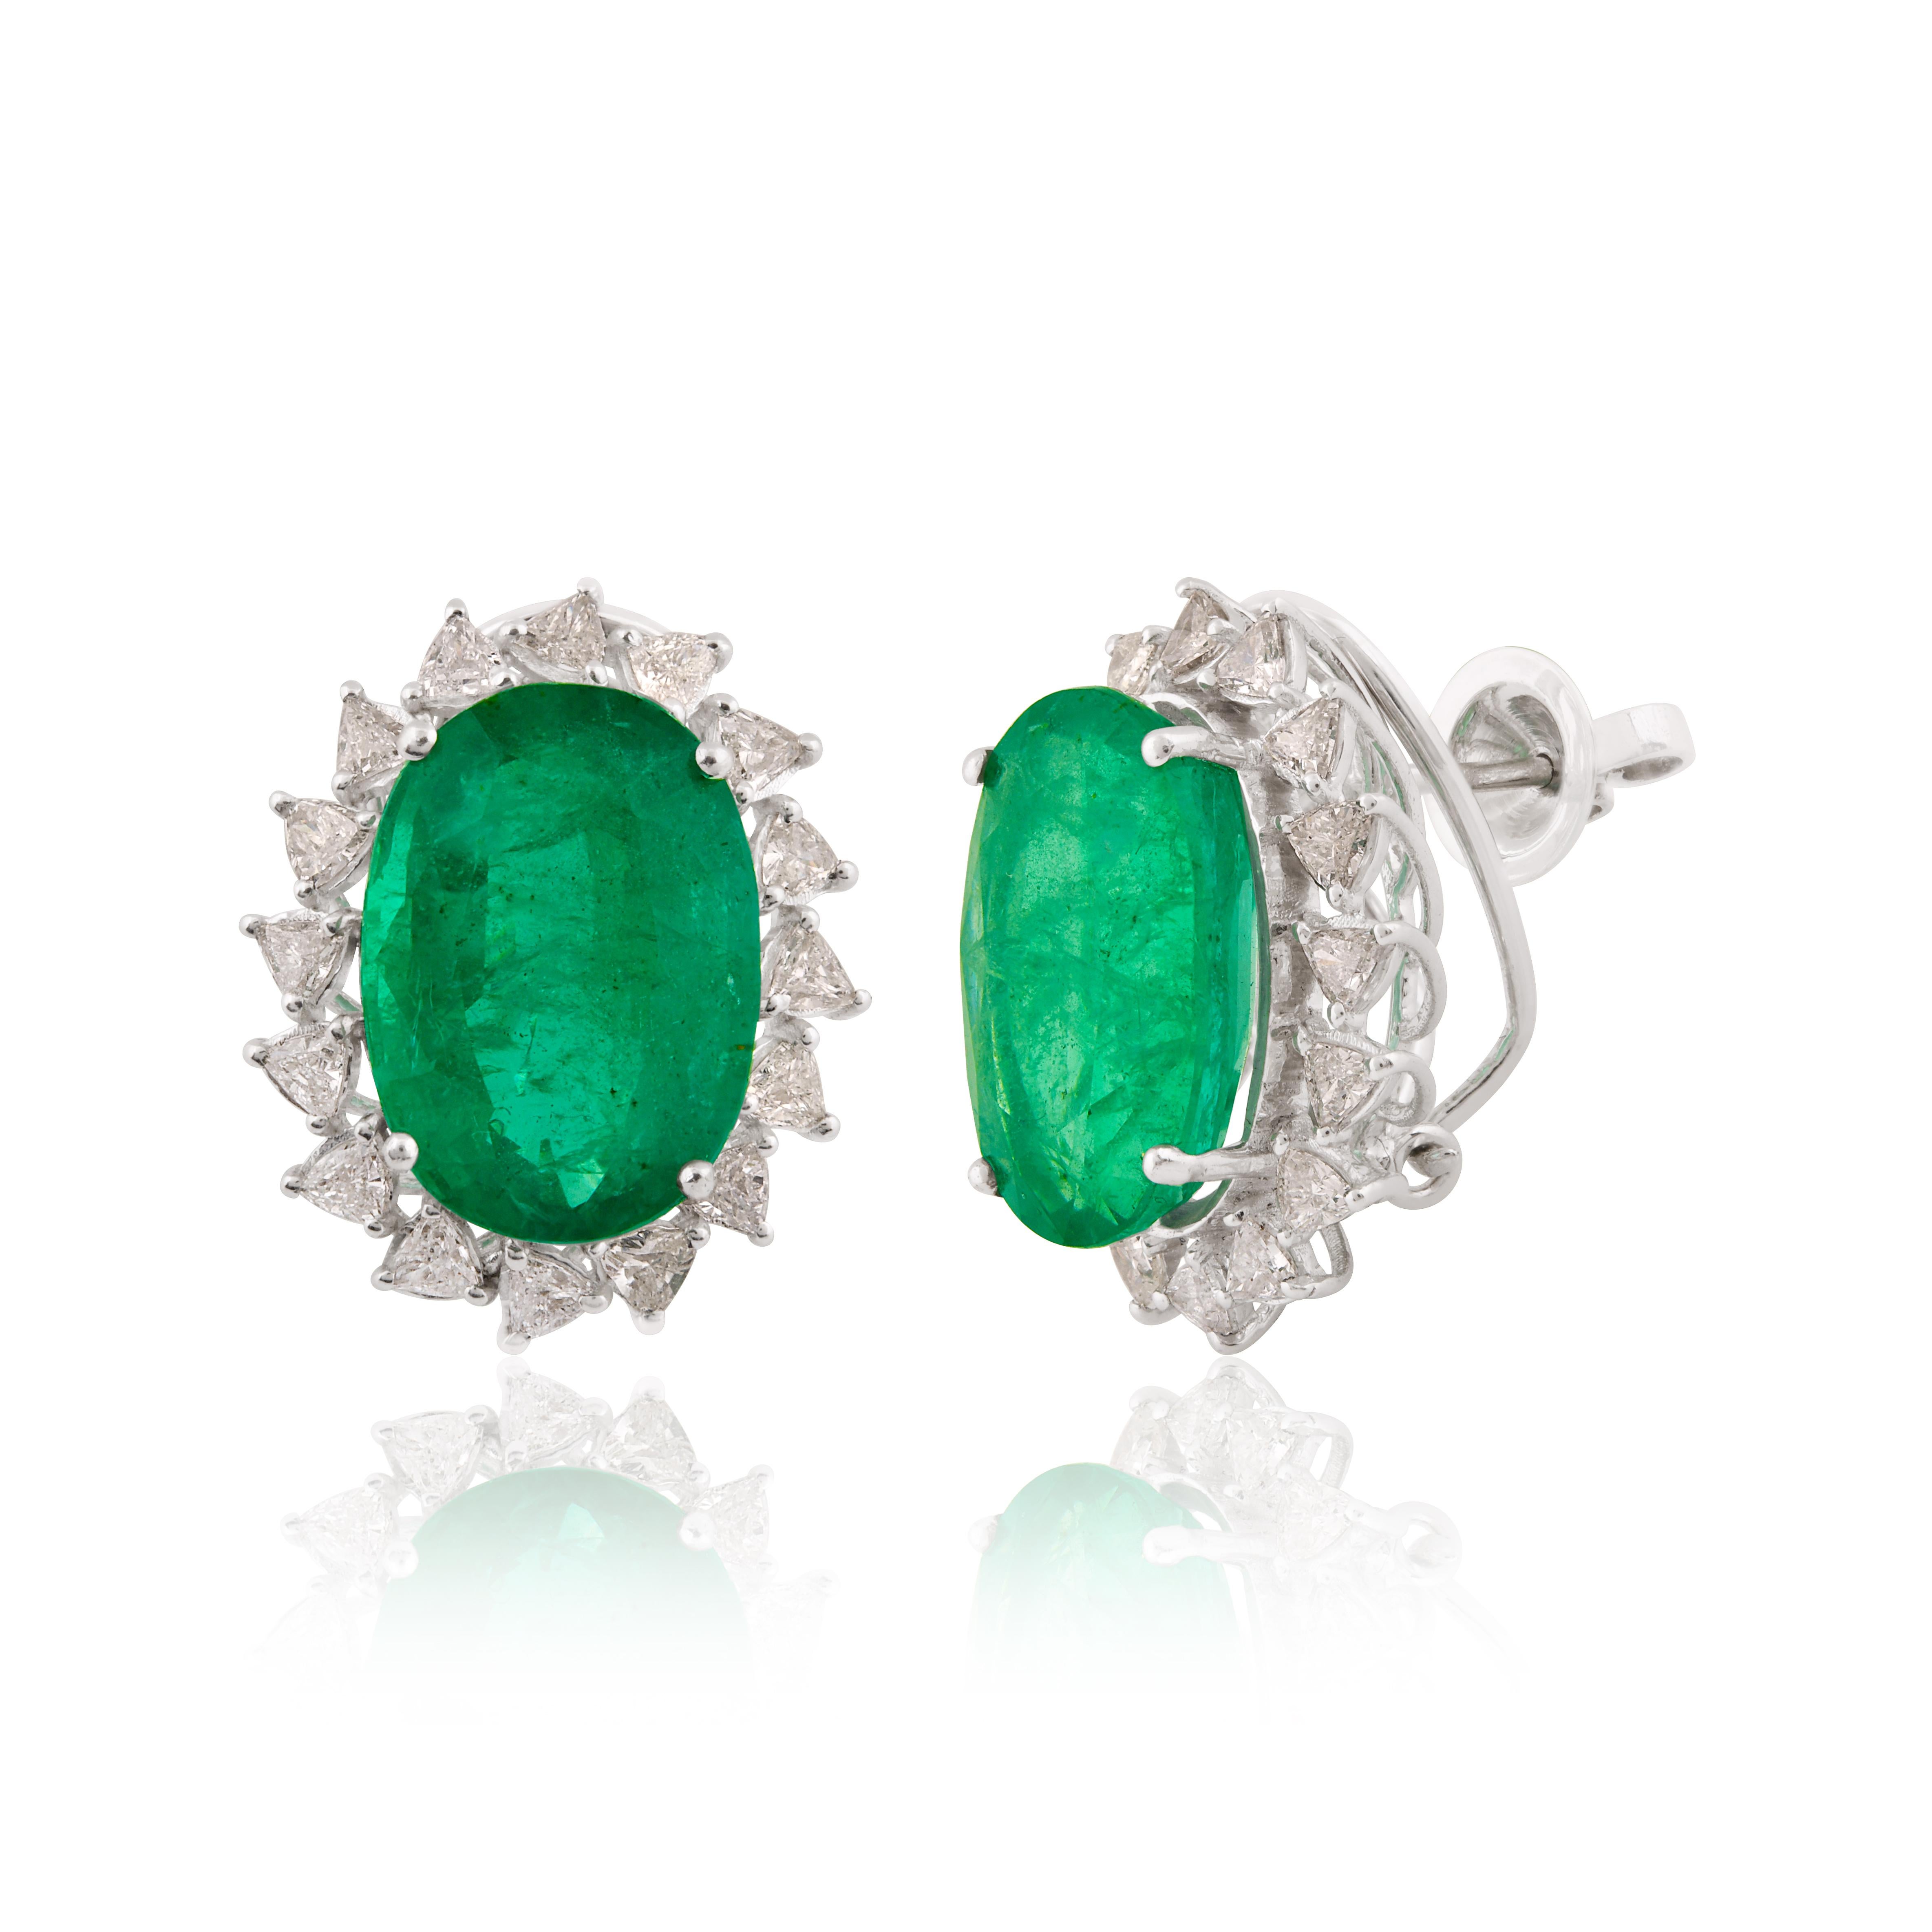 Item Code :- SEE-11501A
Gross Wt :- 10.07 gm
14k Solid White Gold Wt :- 6.49 gm
Natural Diamond Wt :- 1.60 ct.  ( AVERAGE DIAMOND CLARITY SI1-SI2 & COLOR H-I )
Emerald Wt :- 16.29 ct.
Earrings Size :- 23 mm approx.

✦ Sizing
.....................
We